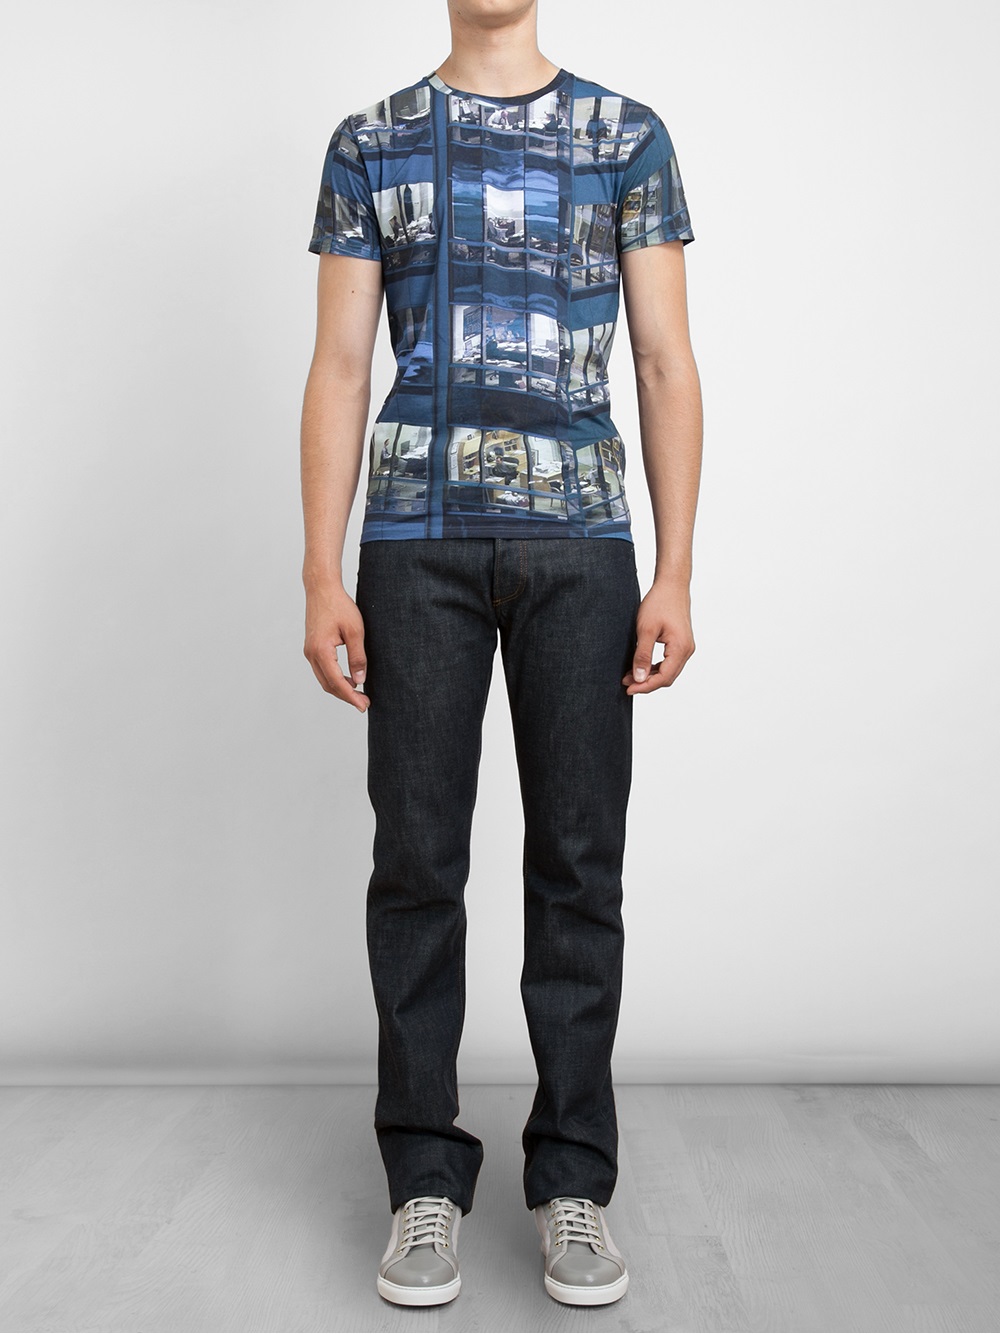 Carven Michael Wolf Office Printed Tshirt in Blue for Men - Lyst